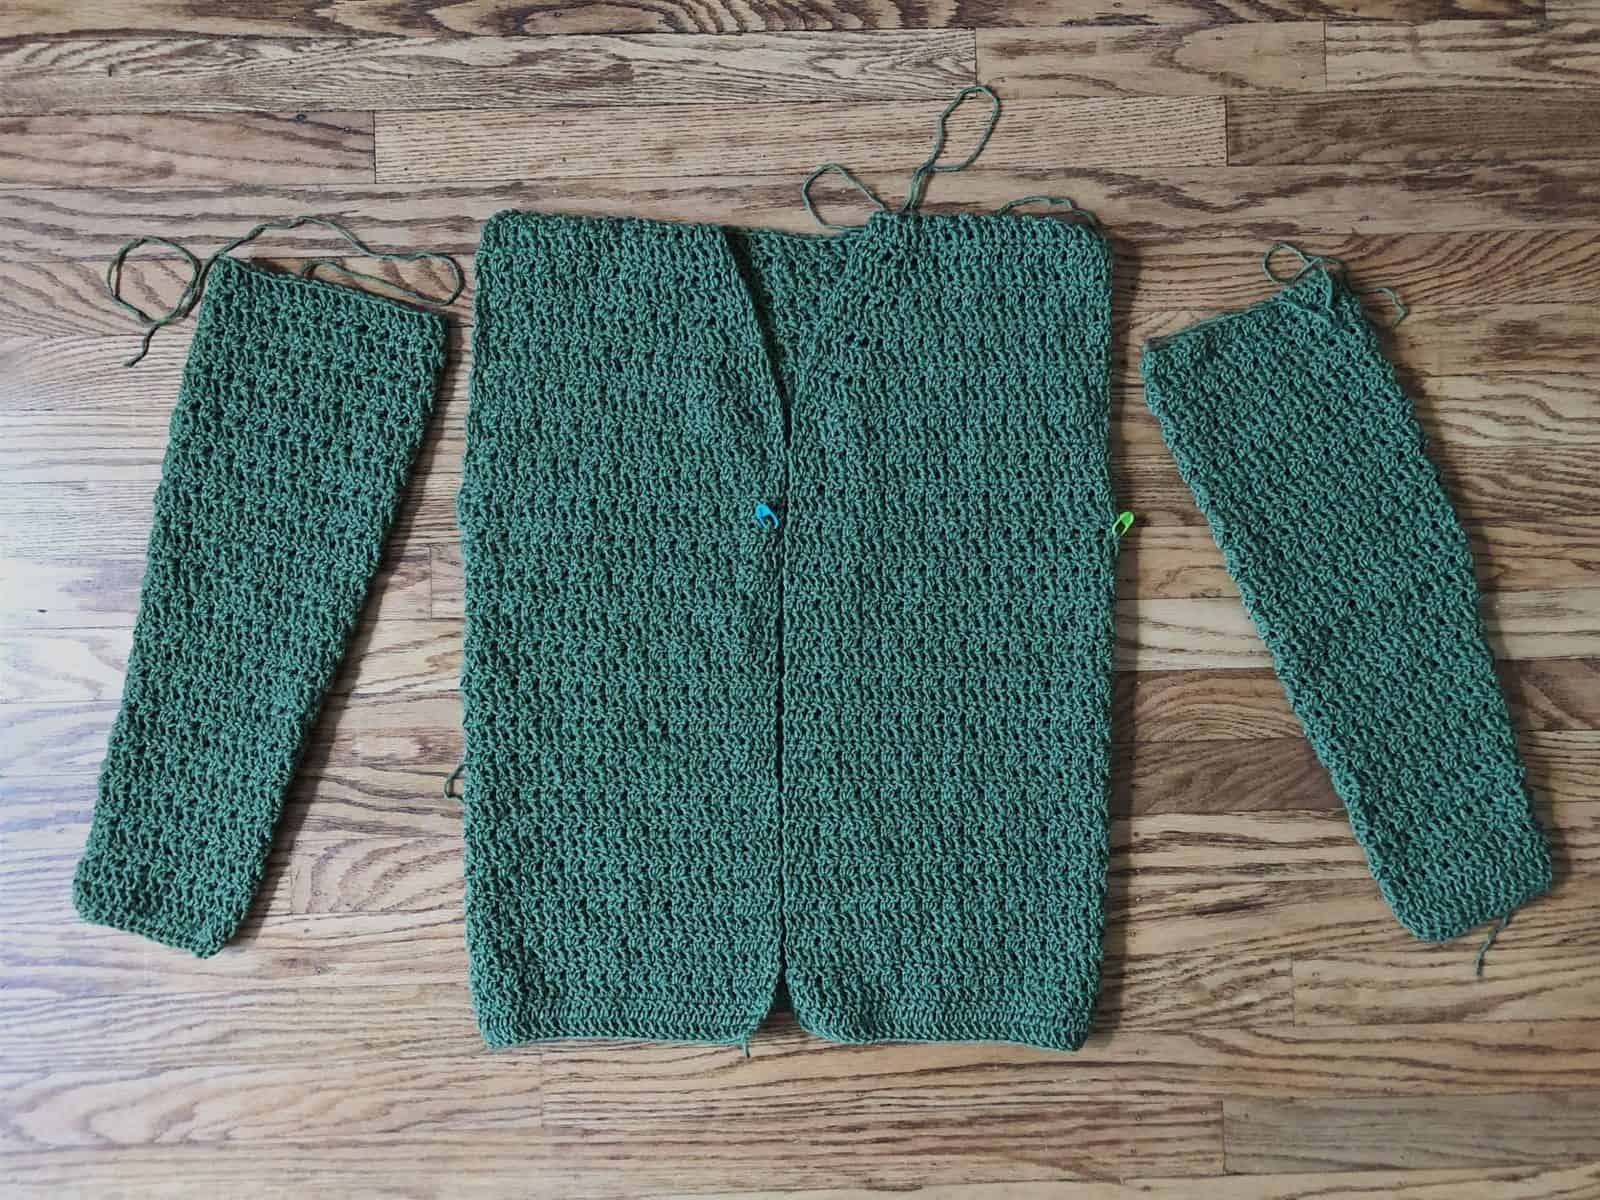 Crochet cardigan with sleeves ready to seam on.